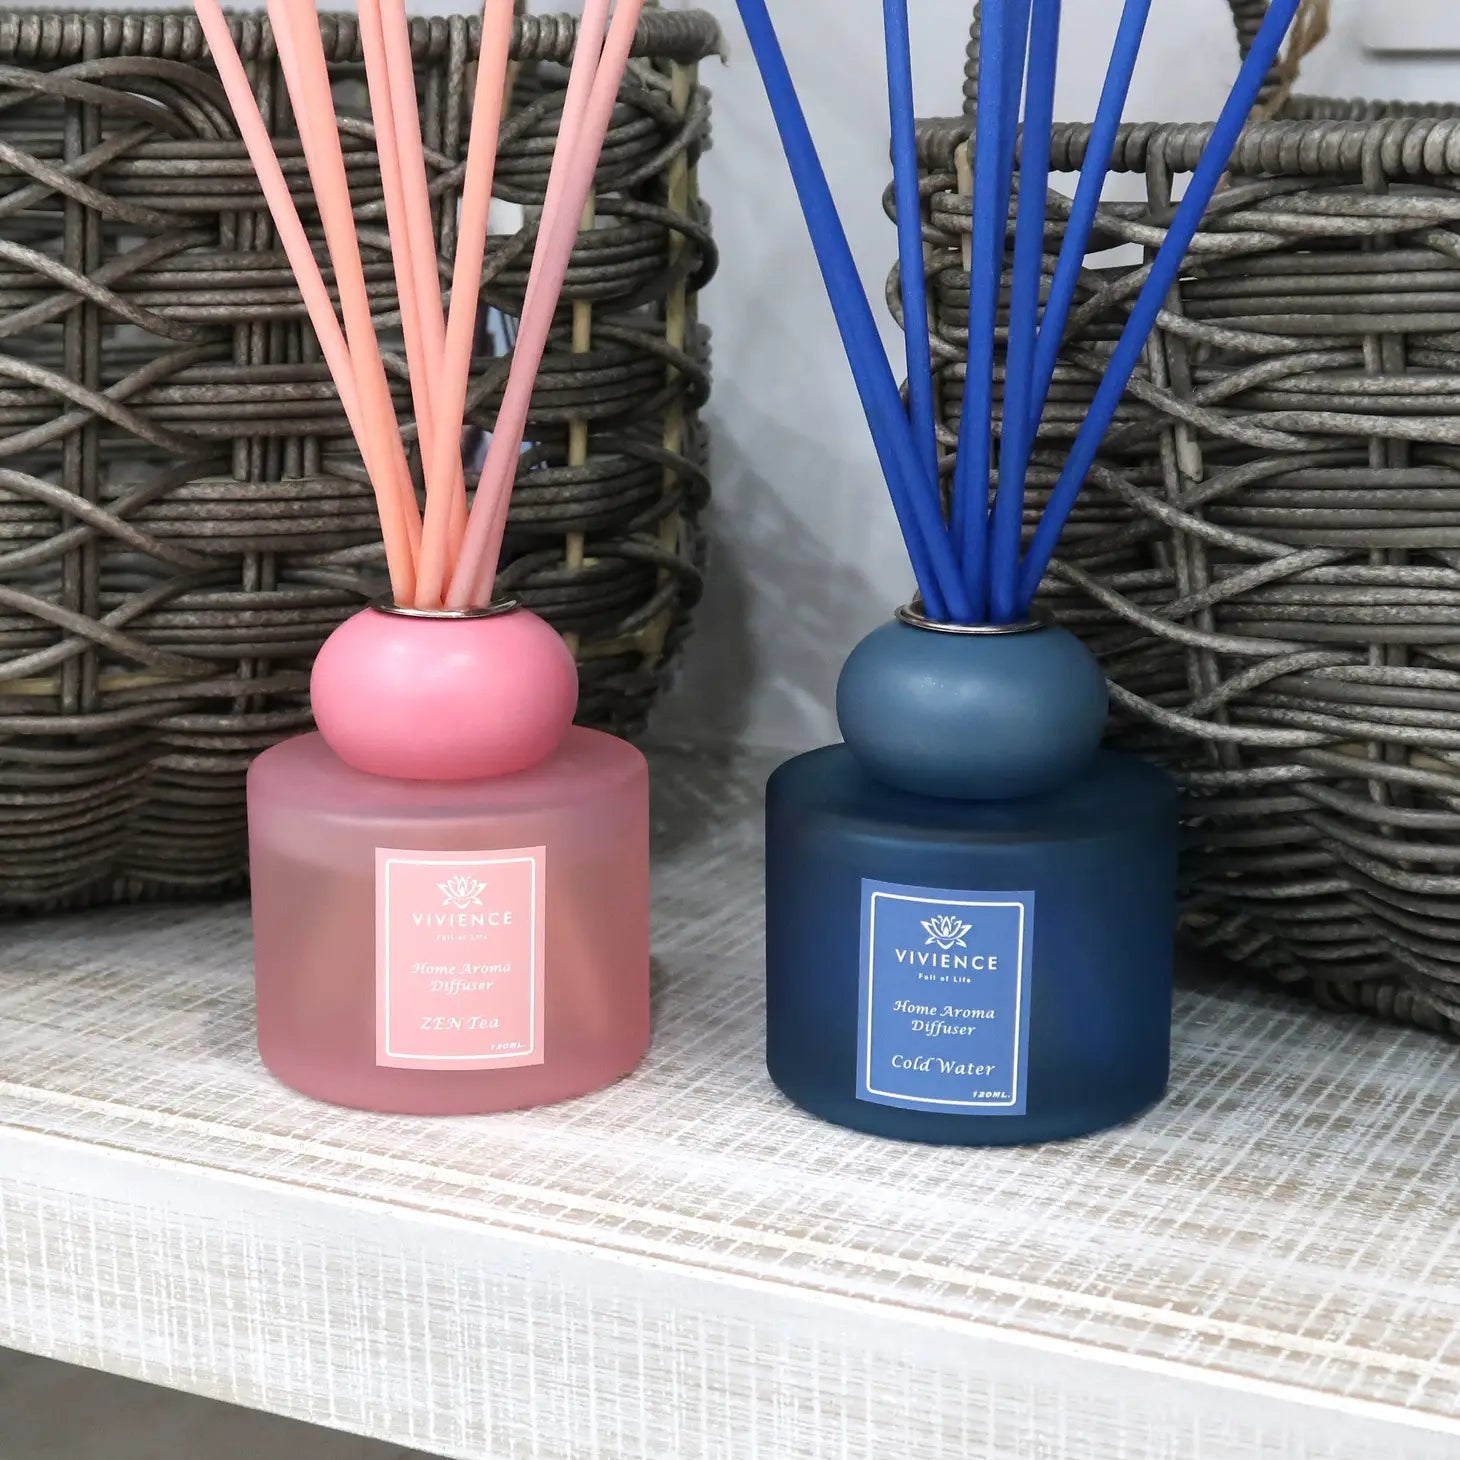 Set of 2 Diffusers with bamboo sticks - Blue, Pink Diffuser High Class Touch - Home Decor 